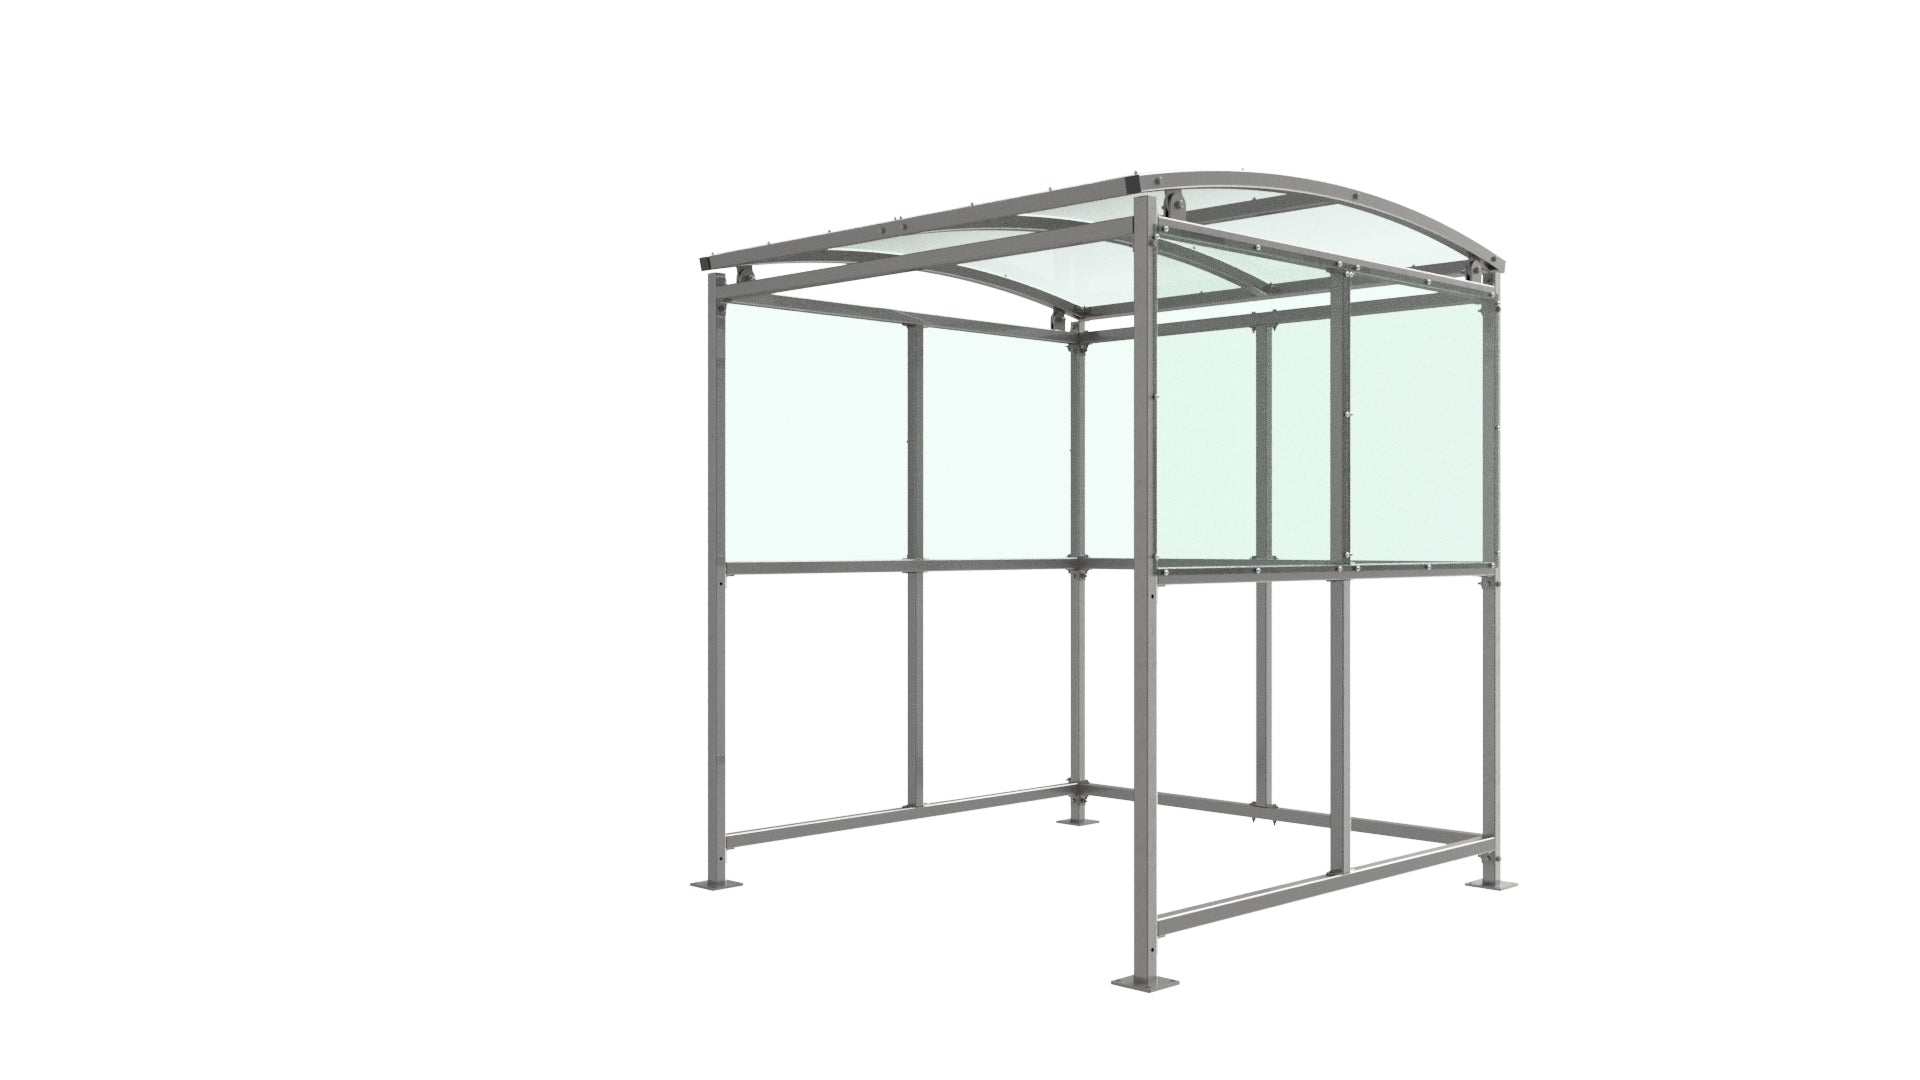 Brandon Cycle Shelter Galvanised Steel Frame Open Sided